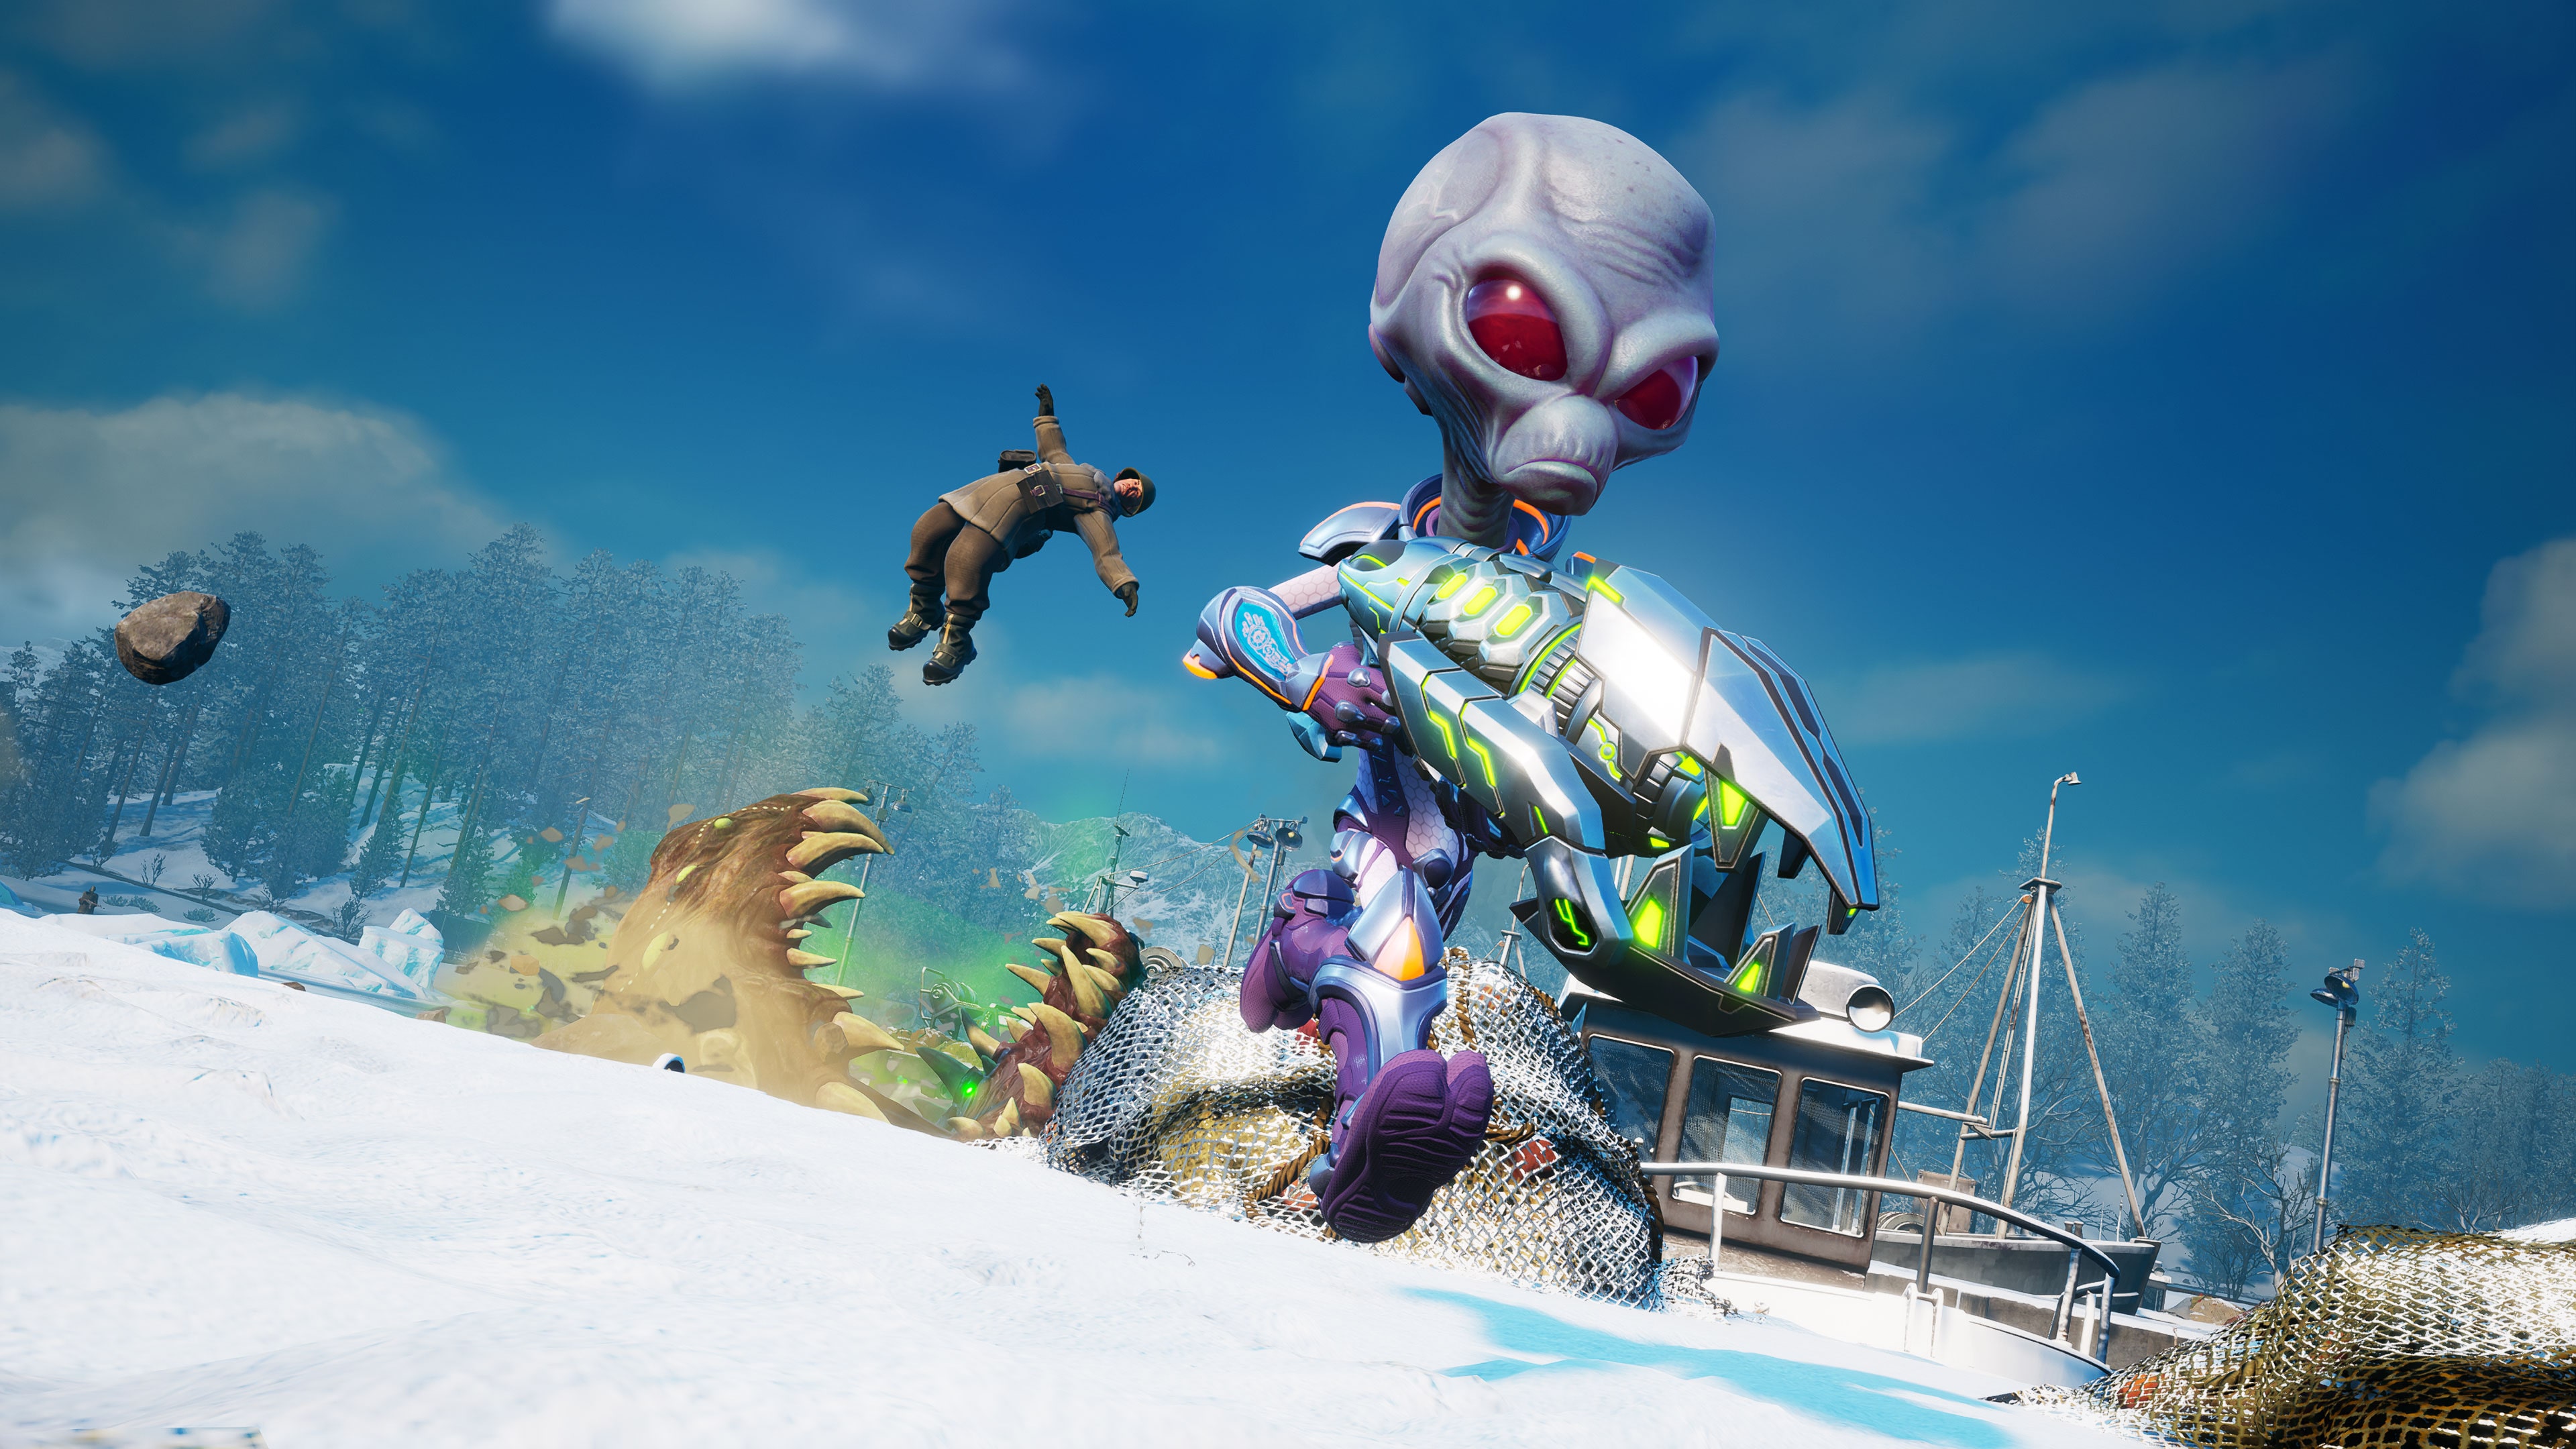 Destroy all humans reprobed. Destroy all Humans 2 reprobed. Игра destroy all Humans! 2 Reprobed. Destroy all Humans 2 reprobed 2022. Destroy all Humans 2 ps4.